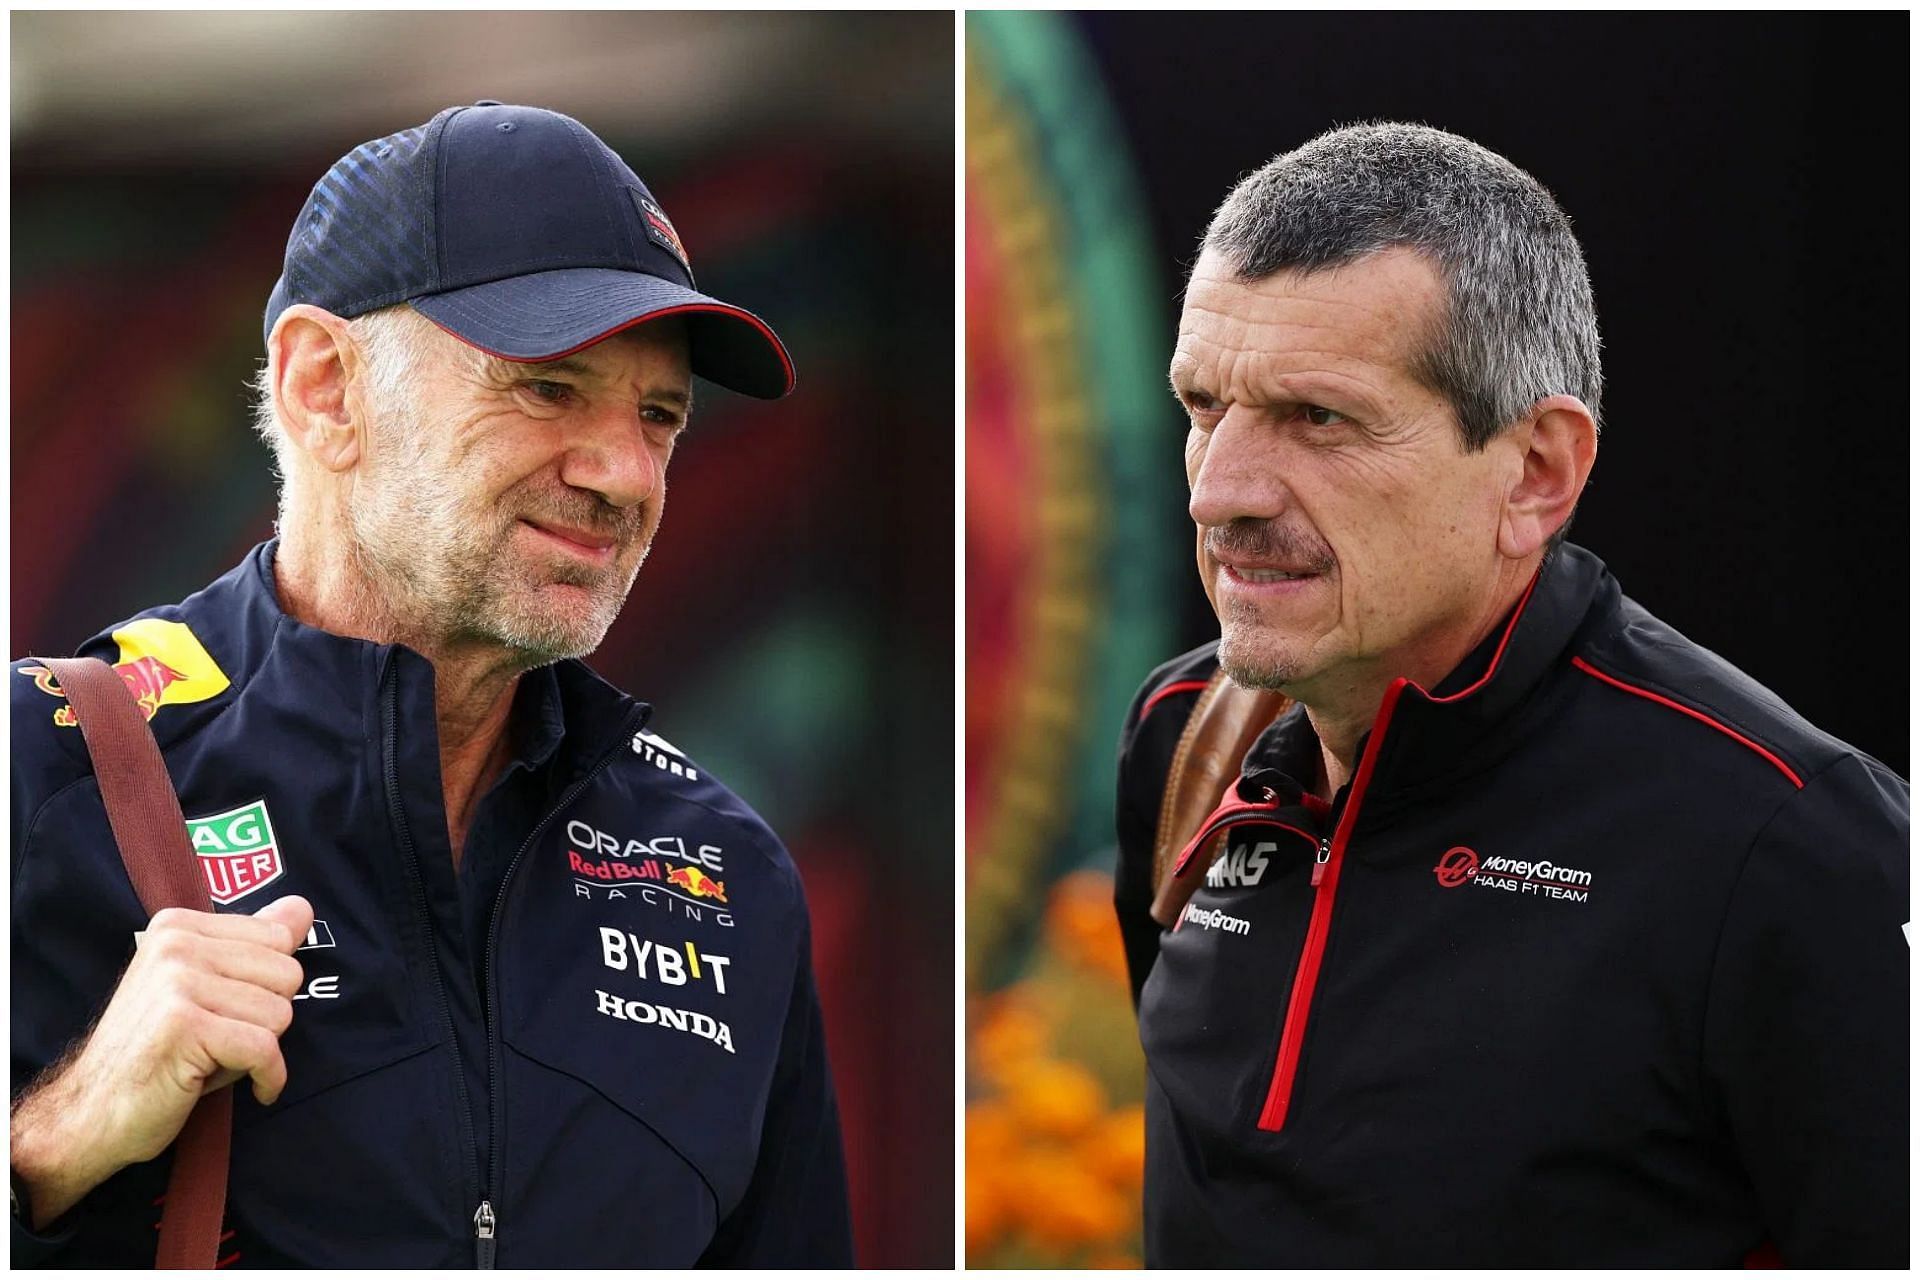 Adrian Newey (L) and Guenther Steiner (R) (Images via Getty Library)